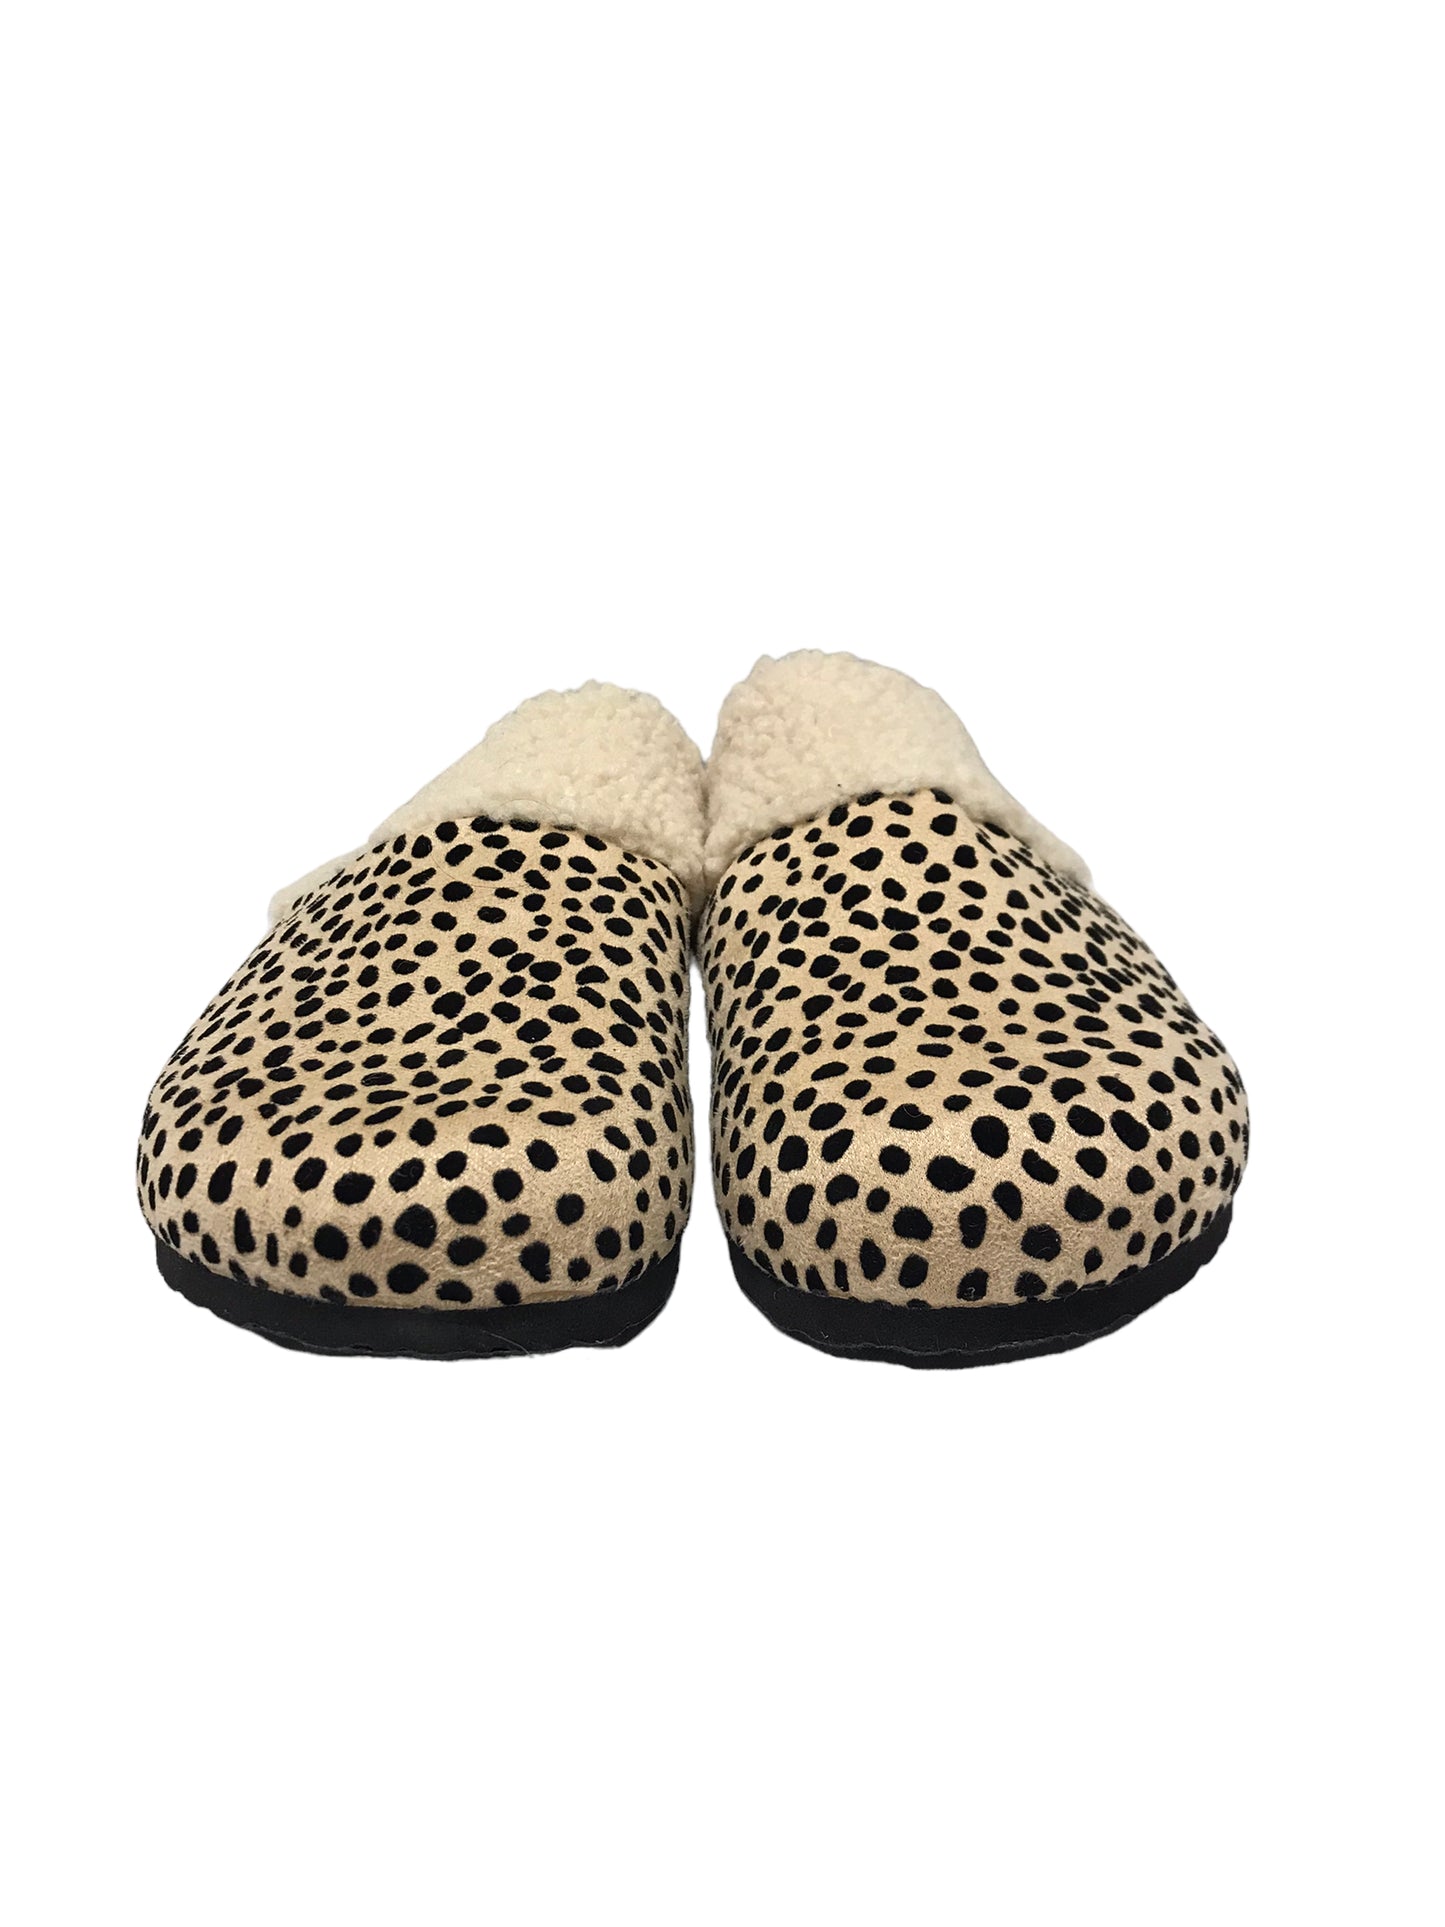 Slippers By   ontwoods Size: 8